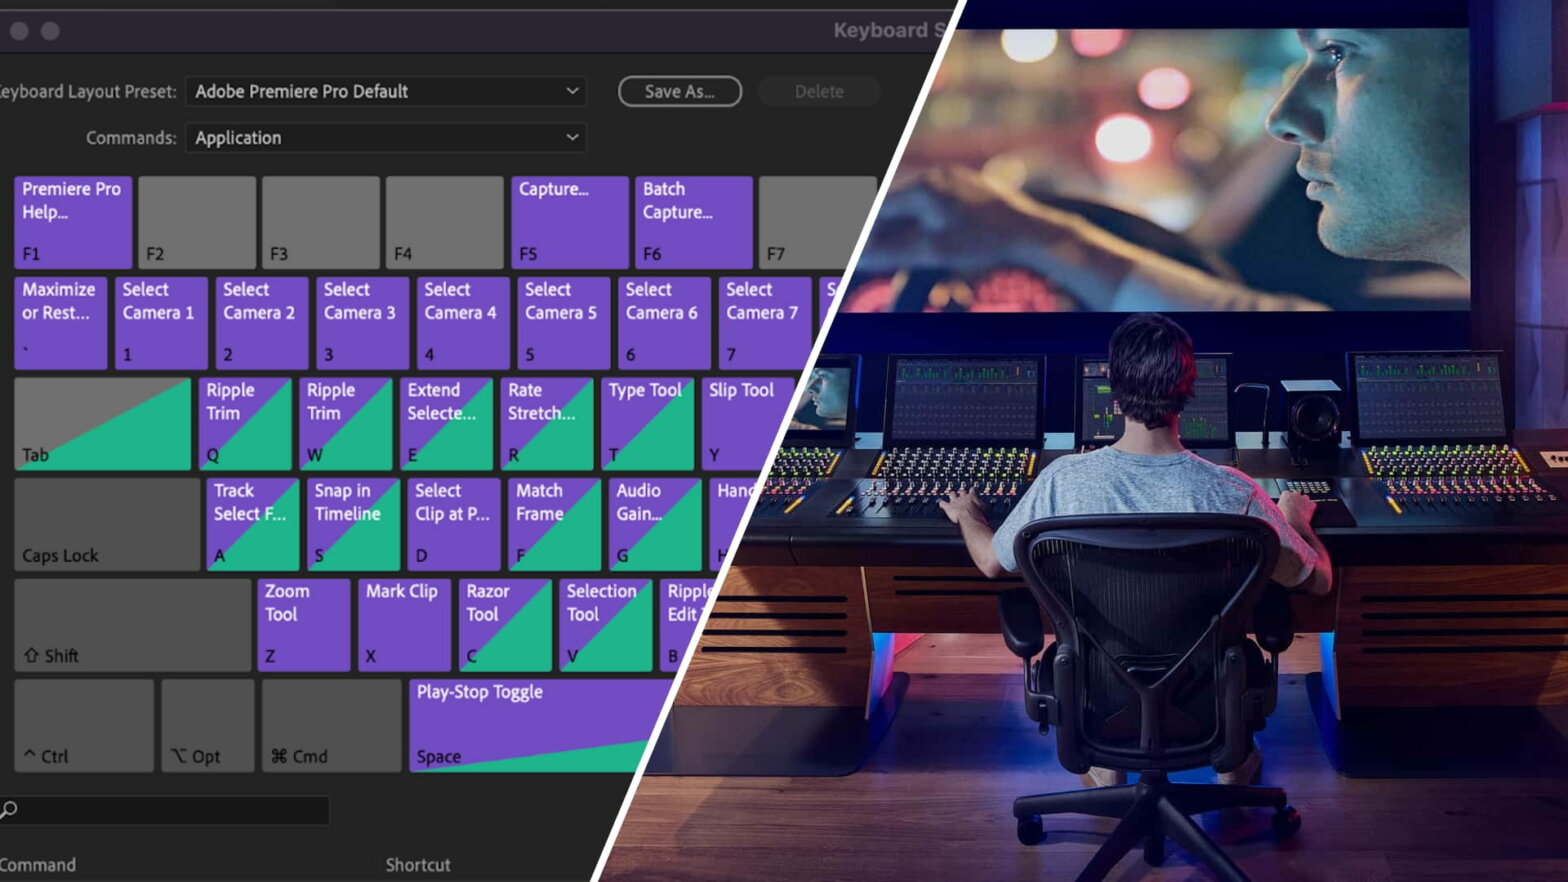 Adobe Premiere Pro Keyboard Shortcuts — The Ultimate Guide Featured